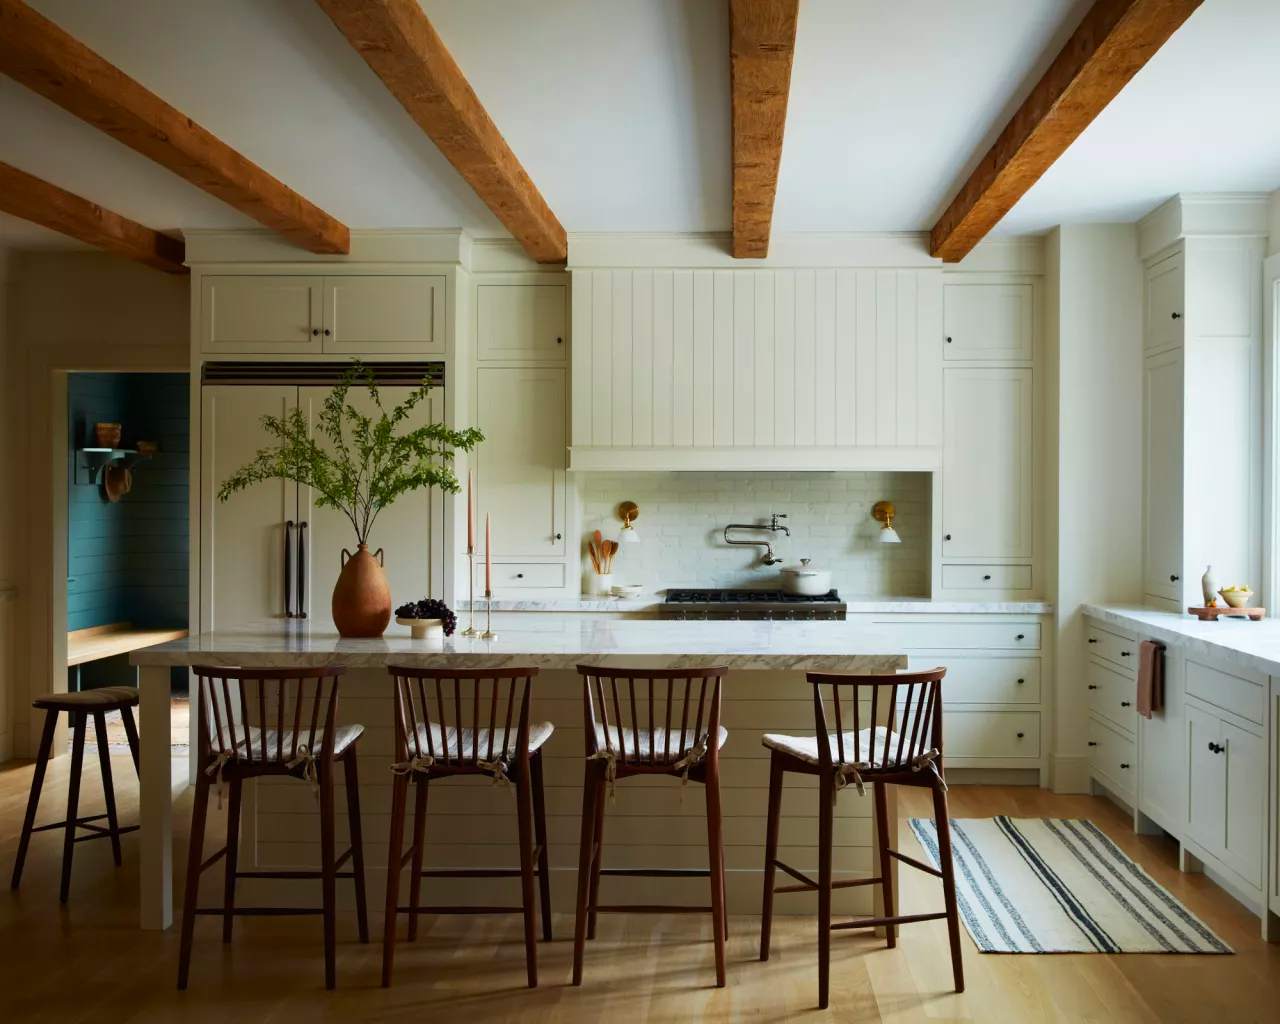 Kitchen with white cabinets and exposed wood beams on ceiling